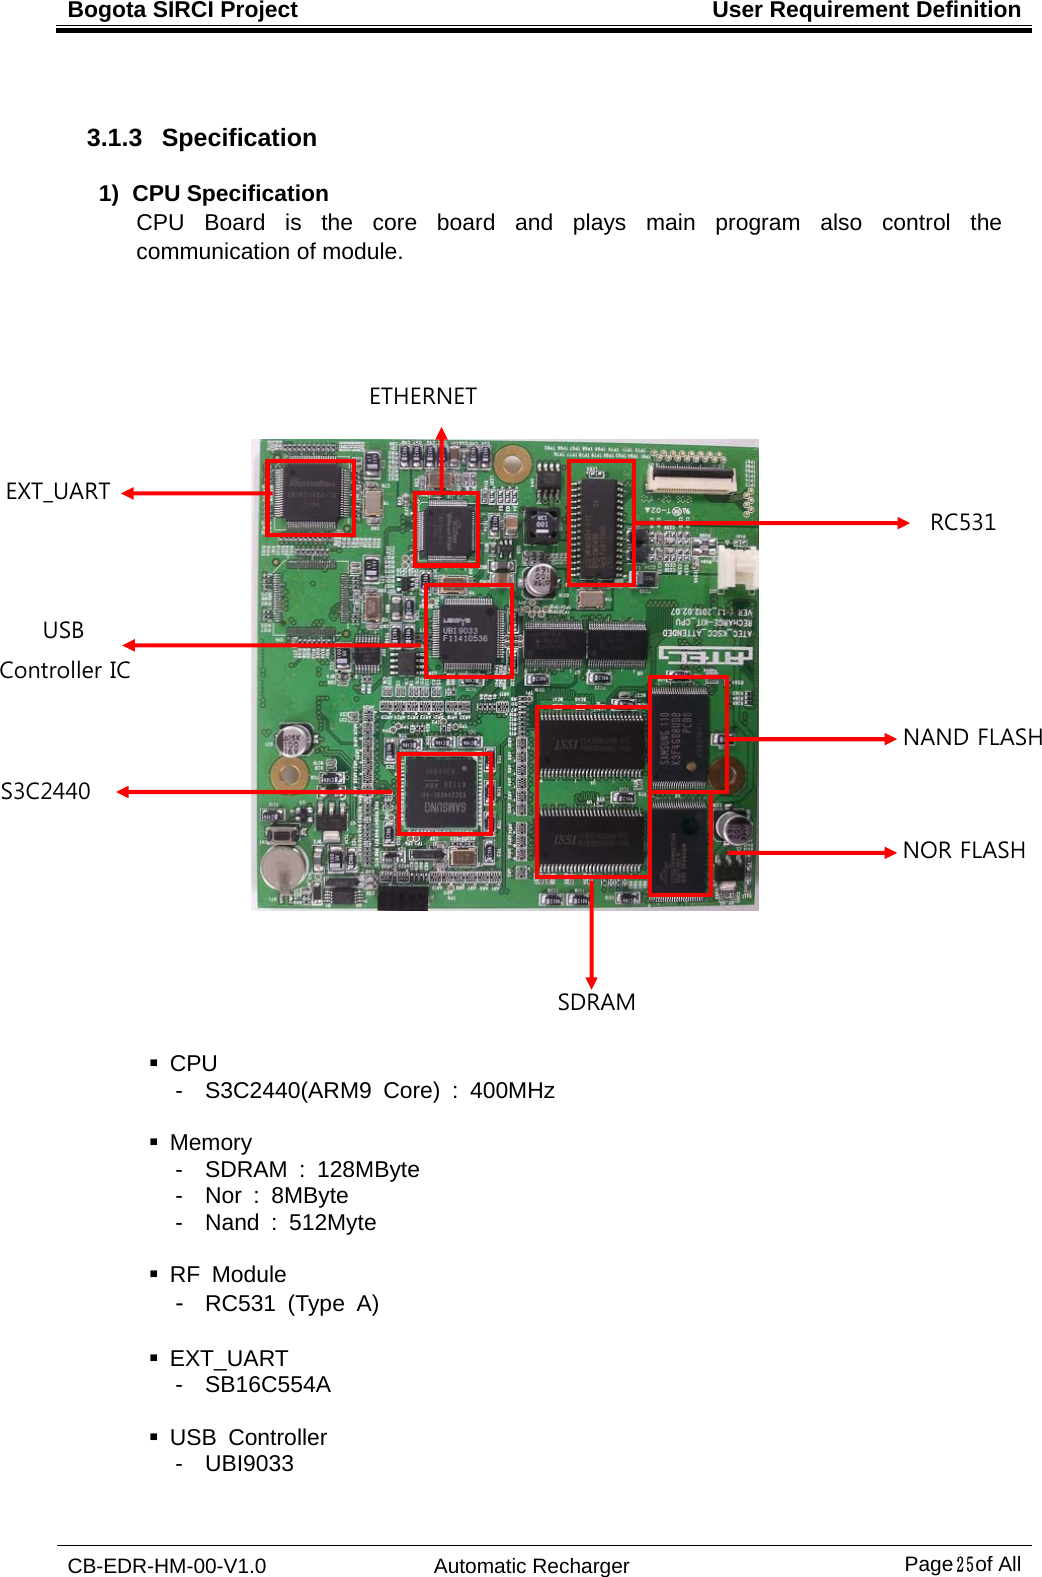 Bogota SIRCI Project  User Requirement Definition CB-EDR-HM-00-V1.0 Automatic Recharger Page２５ of All  3.1.3  Specification 1) CPU Specification CPU Board is the core board and plays main program also control the communication of module.                 CPU -  S3C2440(ARM9 Core) : 400MHz   Memory -  SDRAM : 128MByte -  Nor : 8MByte -  Nand : 512Myte   RF Module -  RC531 (Type A)   EXT_UART - SB16C554A   USB Controller - UBI9033              EXT_UART        USB      Controller IC                     S3C2440            RC531           ETHERNET           NAND FLASH            NOR FLASH          SDRAM